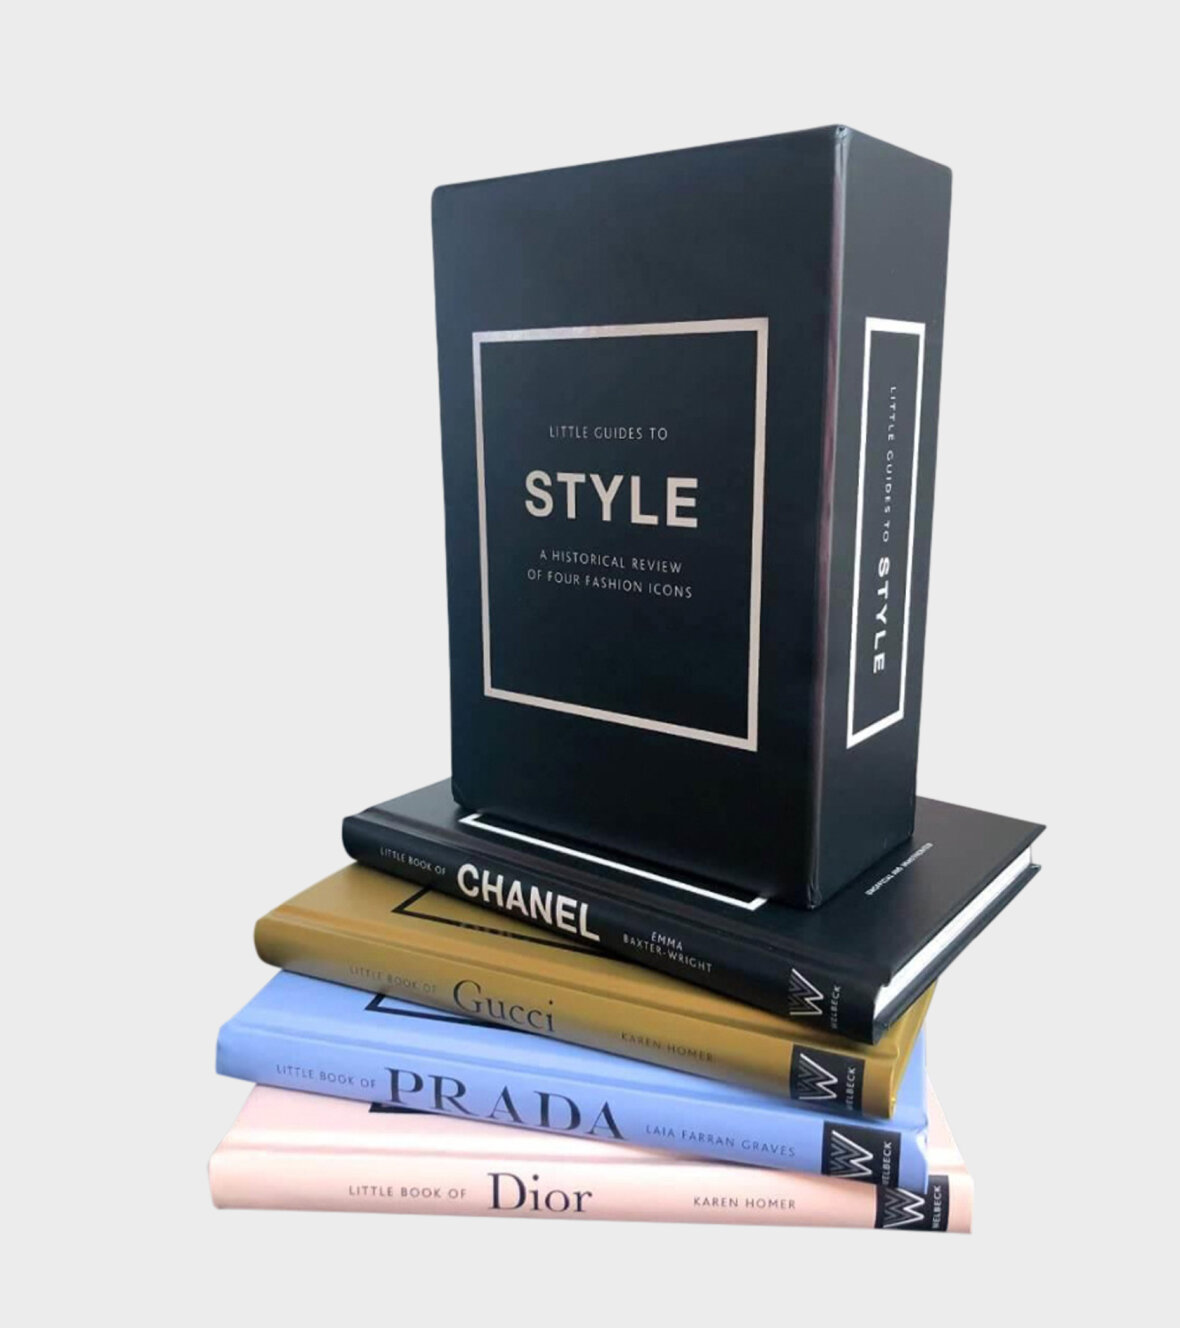 Little Guides to Style - New Mags